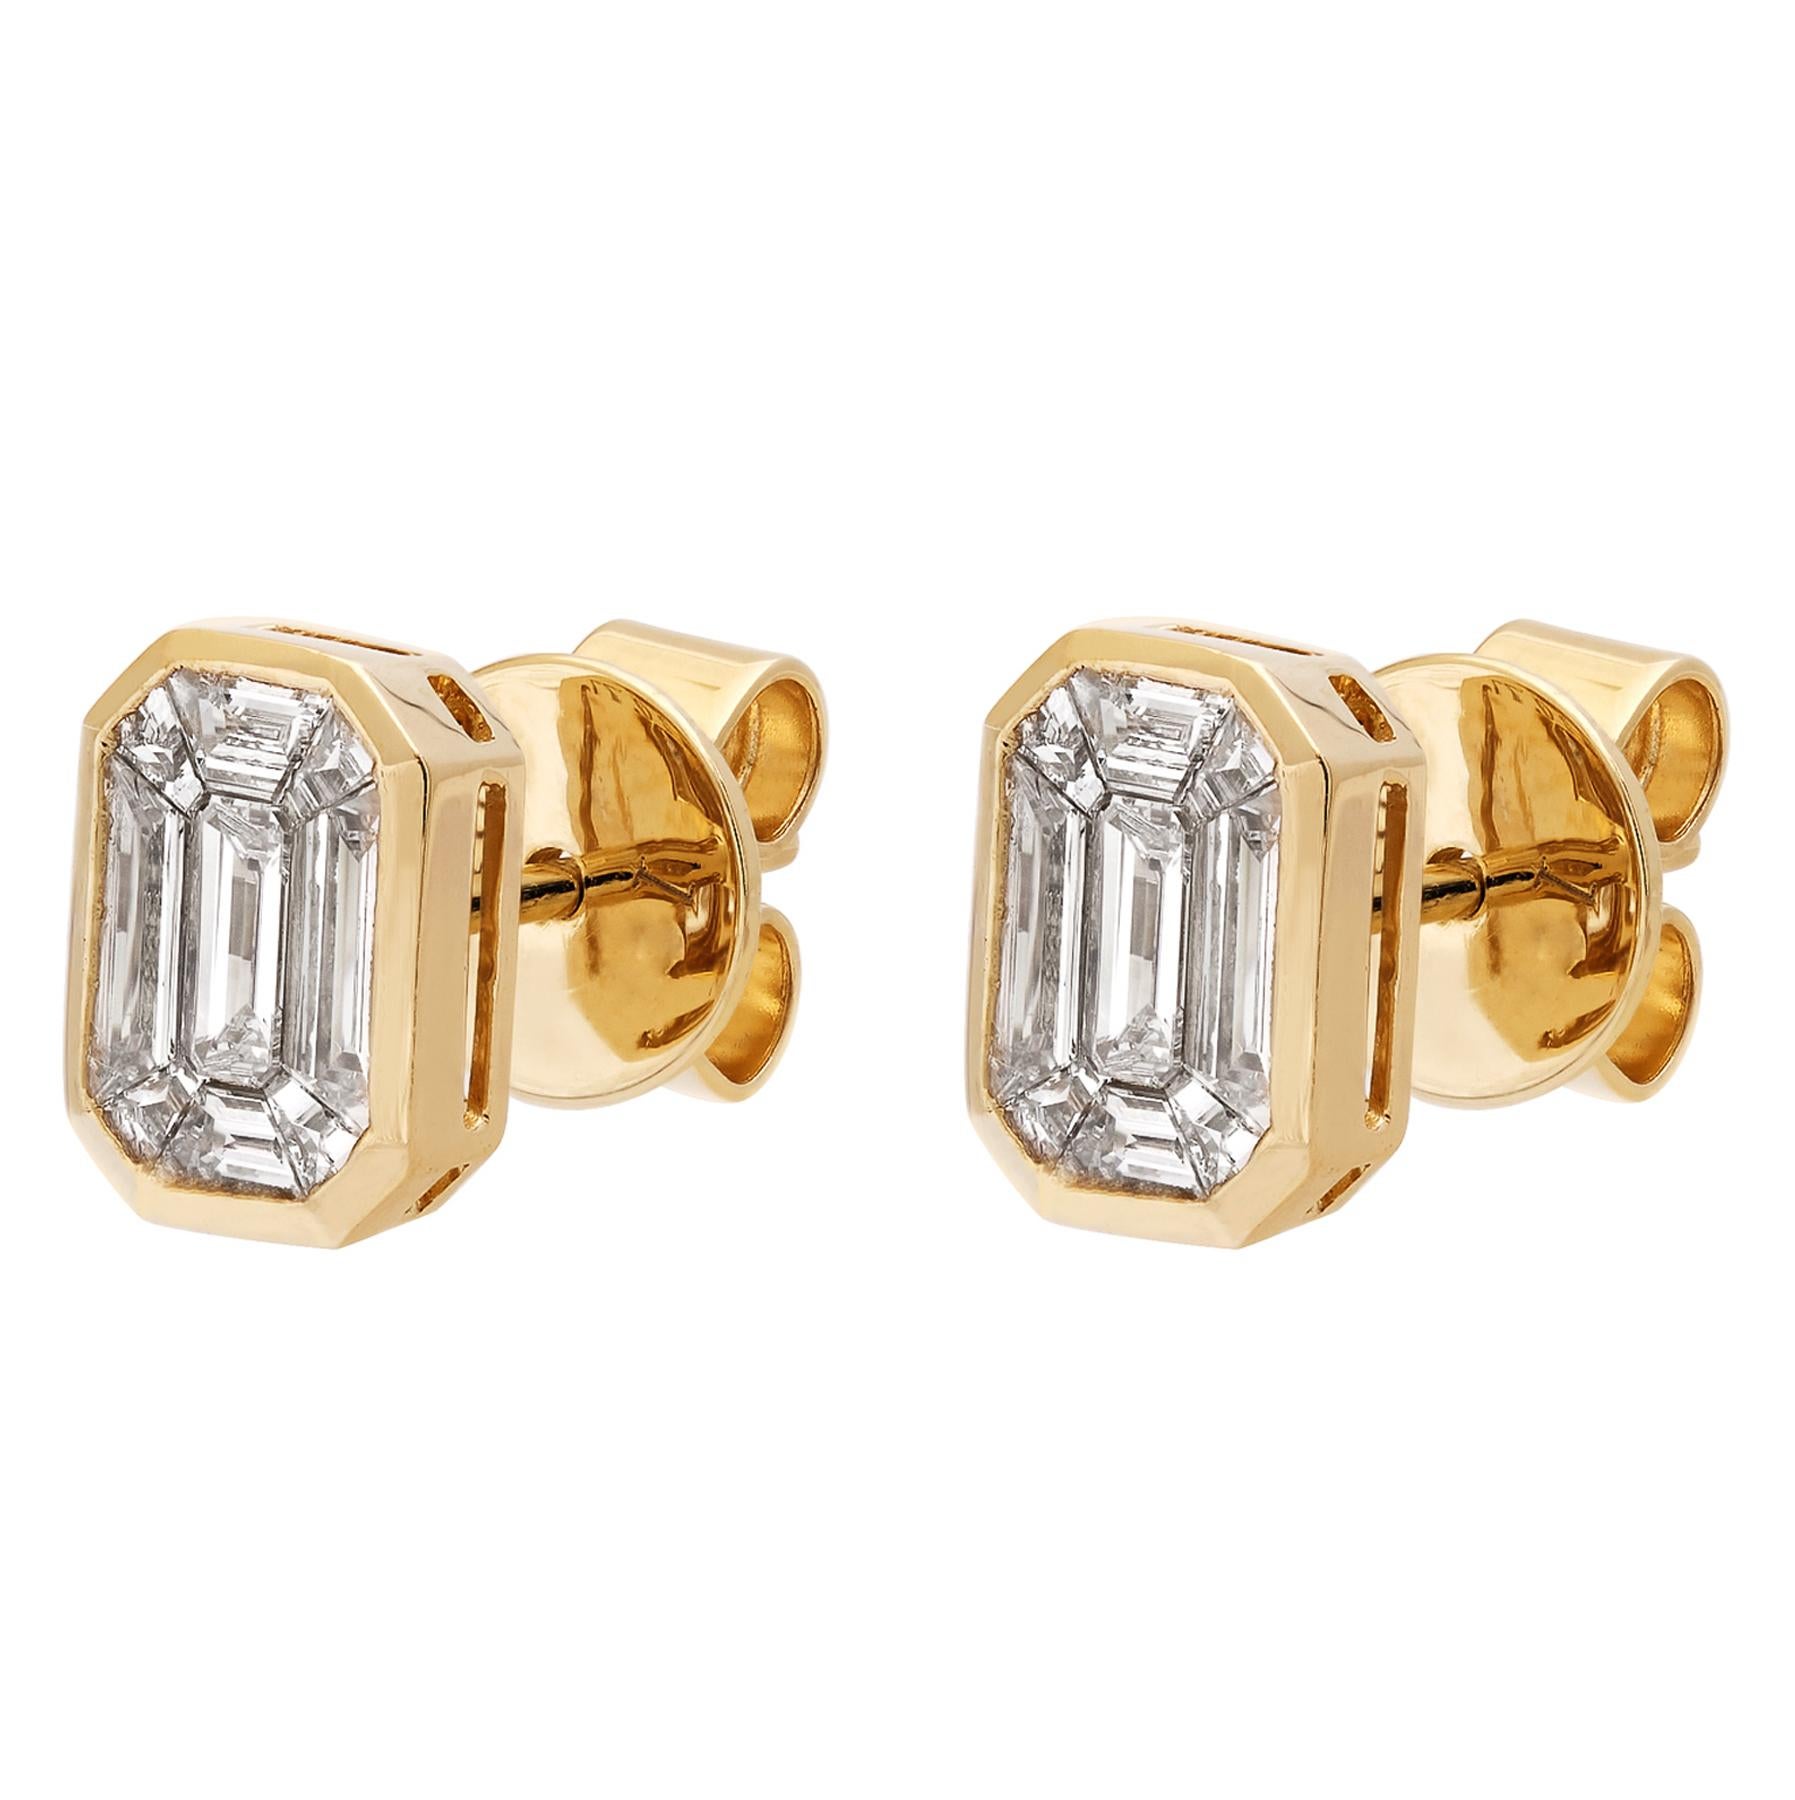 18K Yellow Gold
Diamonds:1.97ct total weight
All diamonds are G-H/SI stones.